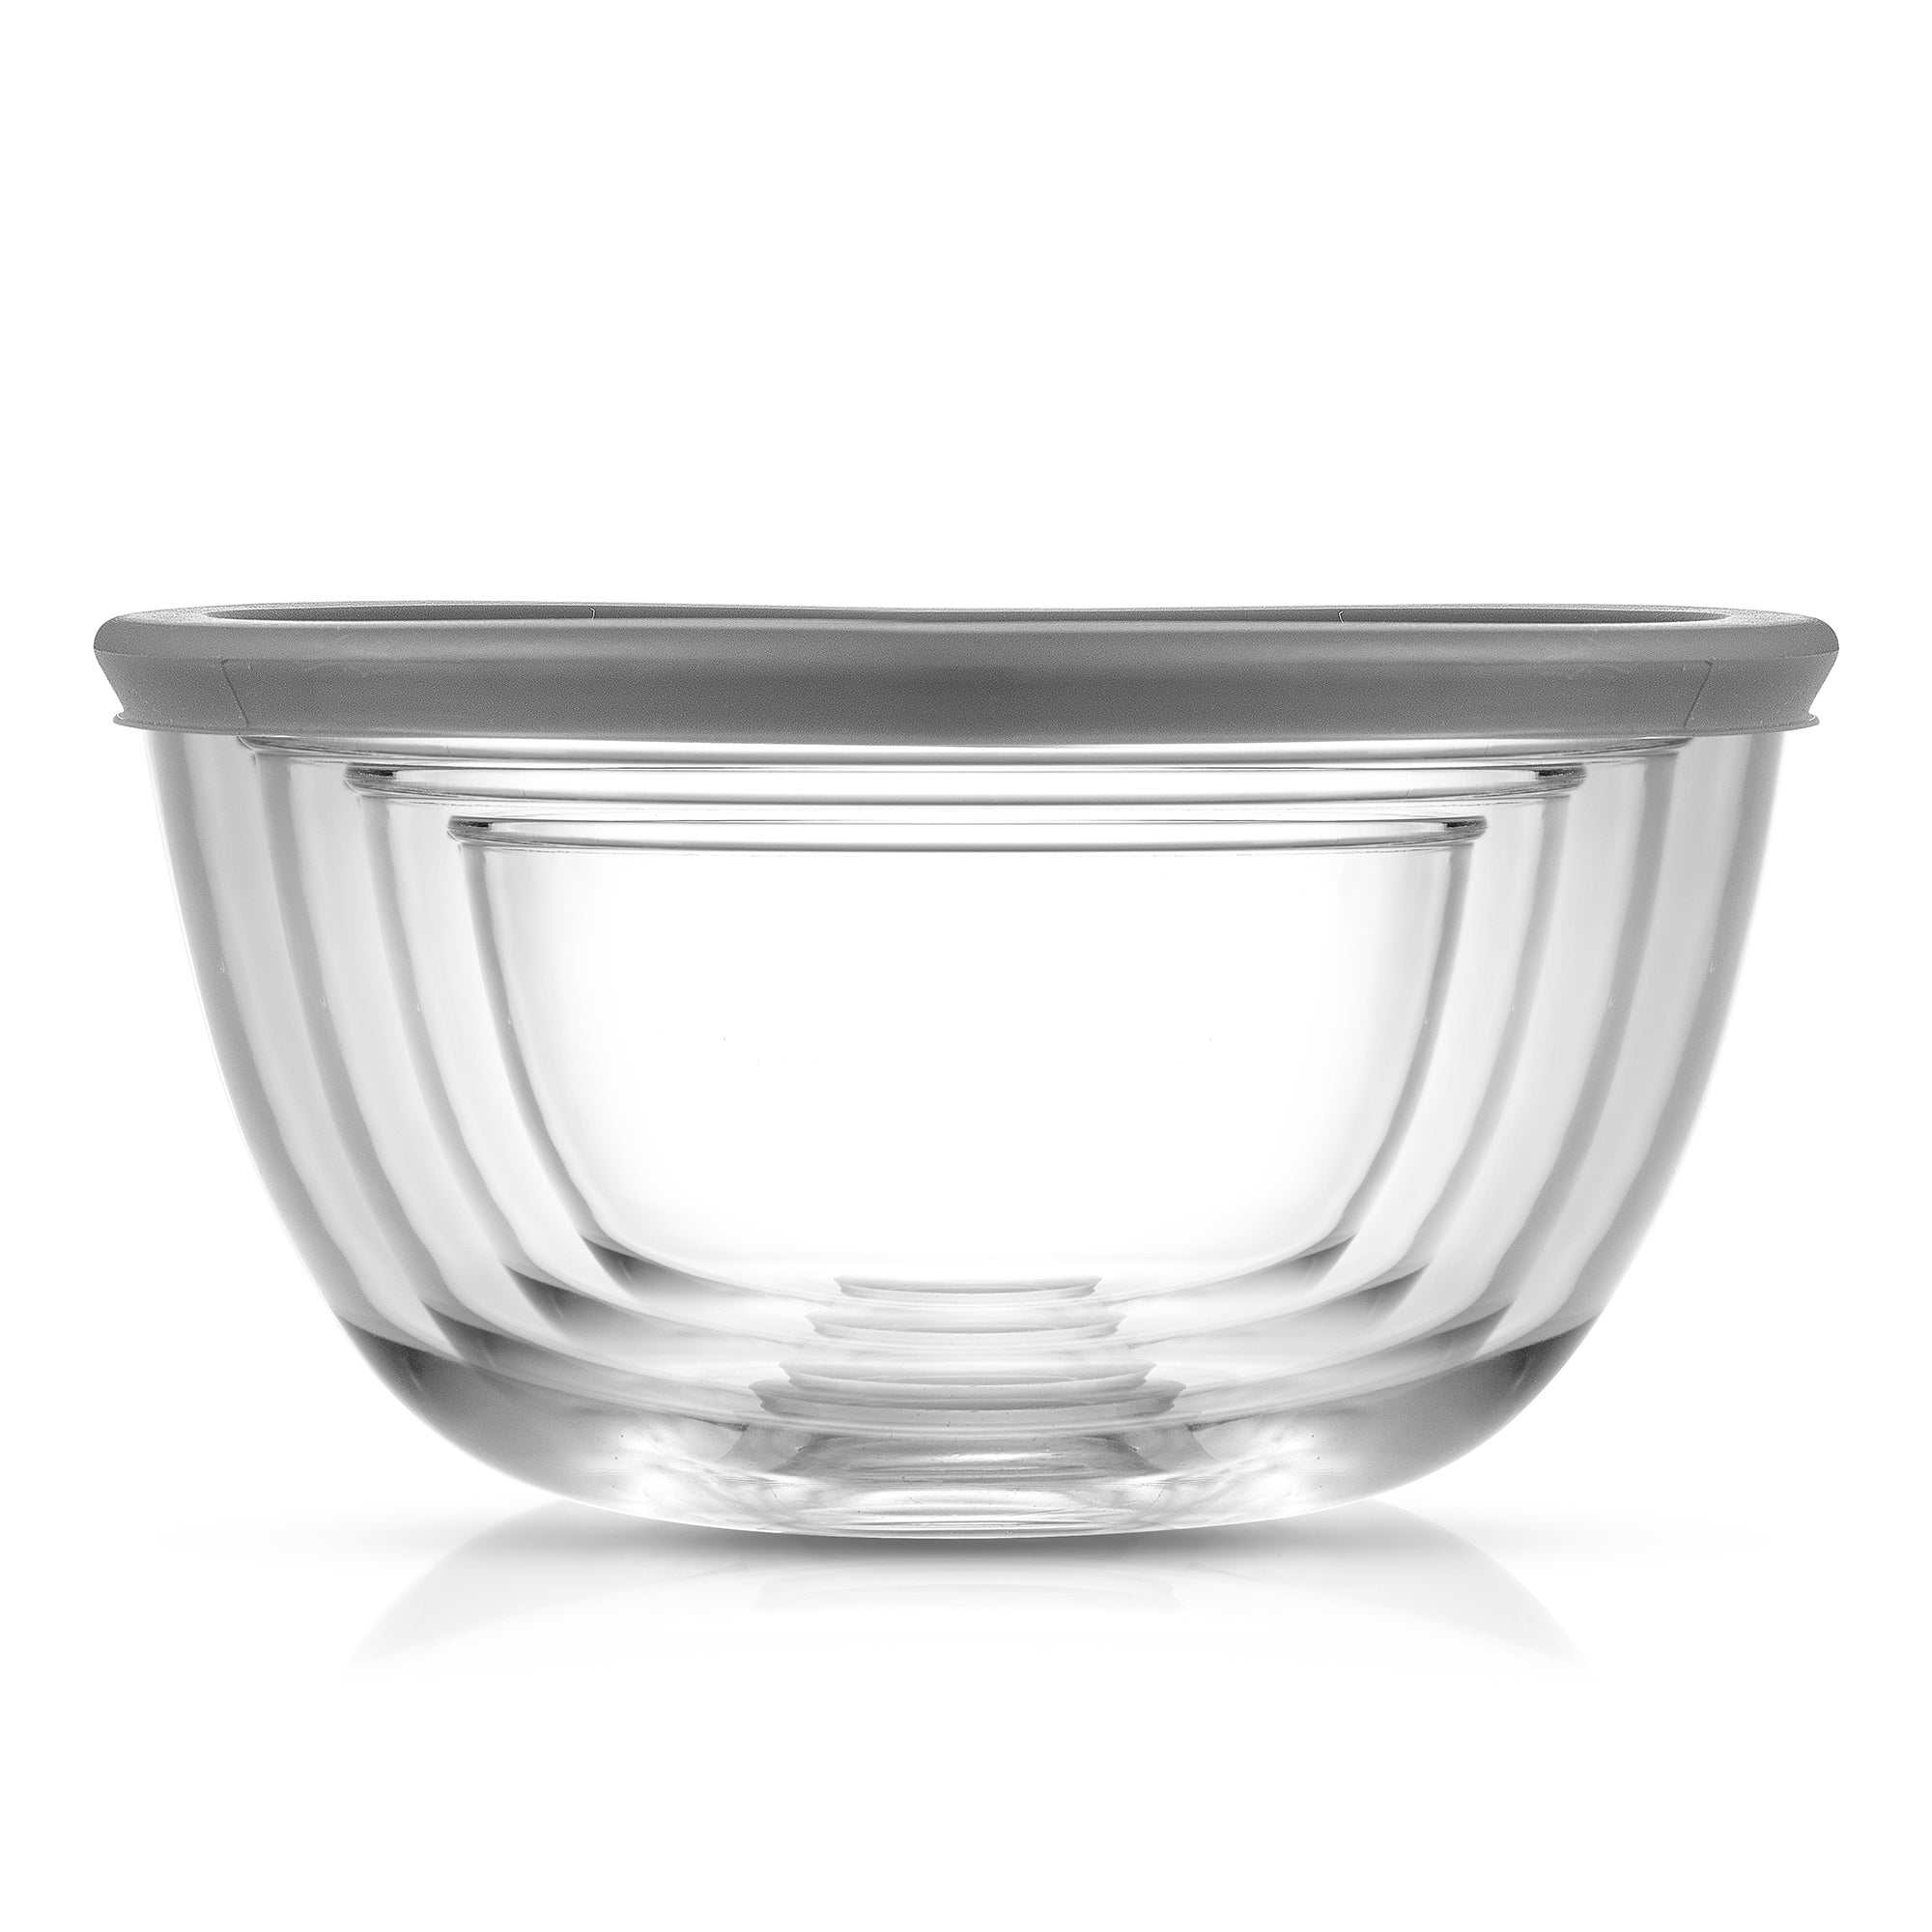 A set of four stackable glass bowls with gray lids sits on a white background. The bowls increase in size from the top to the bottom.